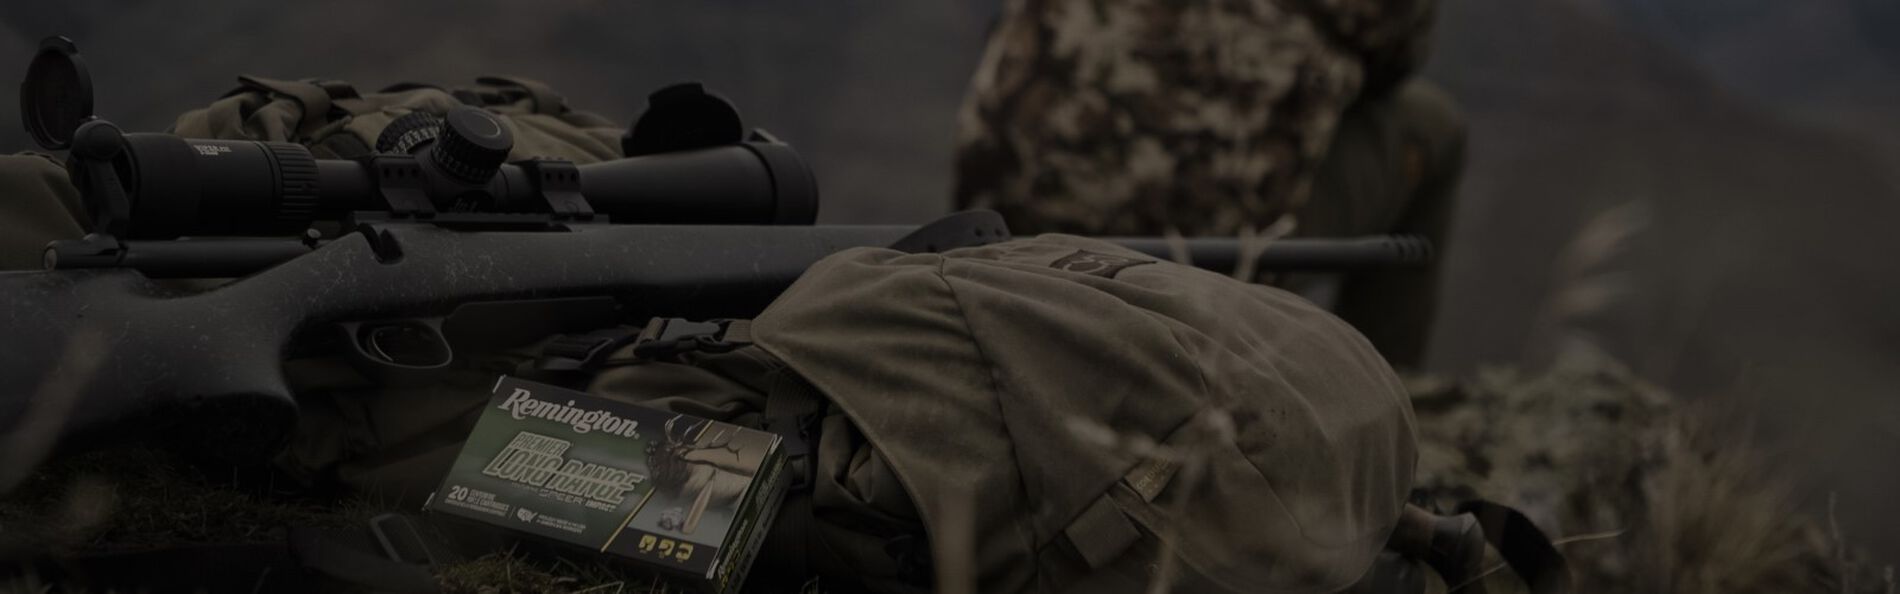 Premier Long Range box laying next to a rifle and backpack with a hunter sitting in the background